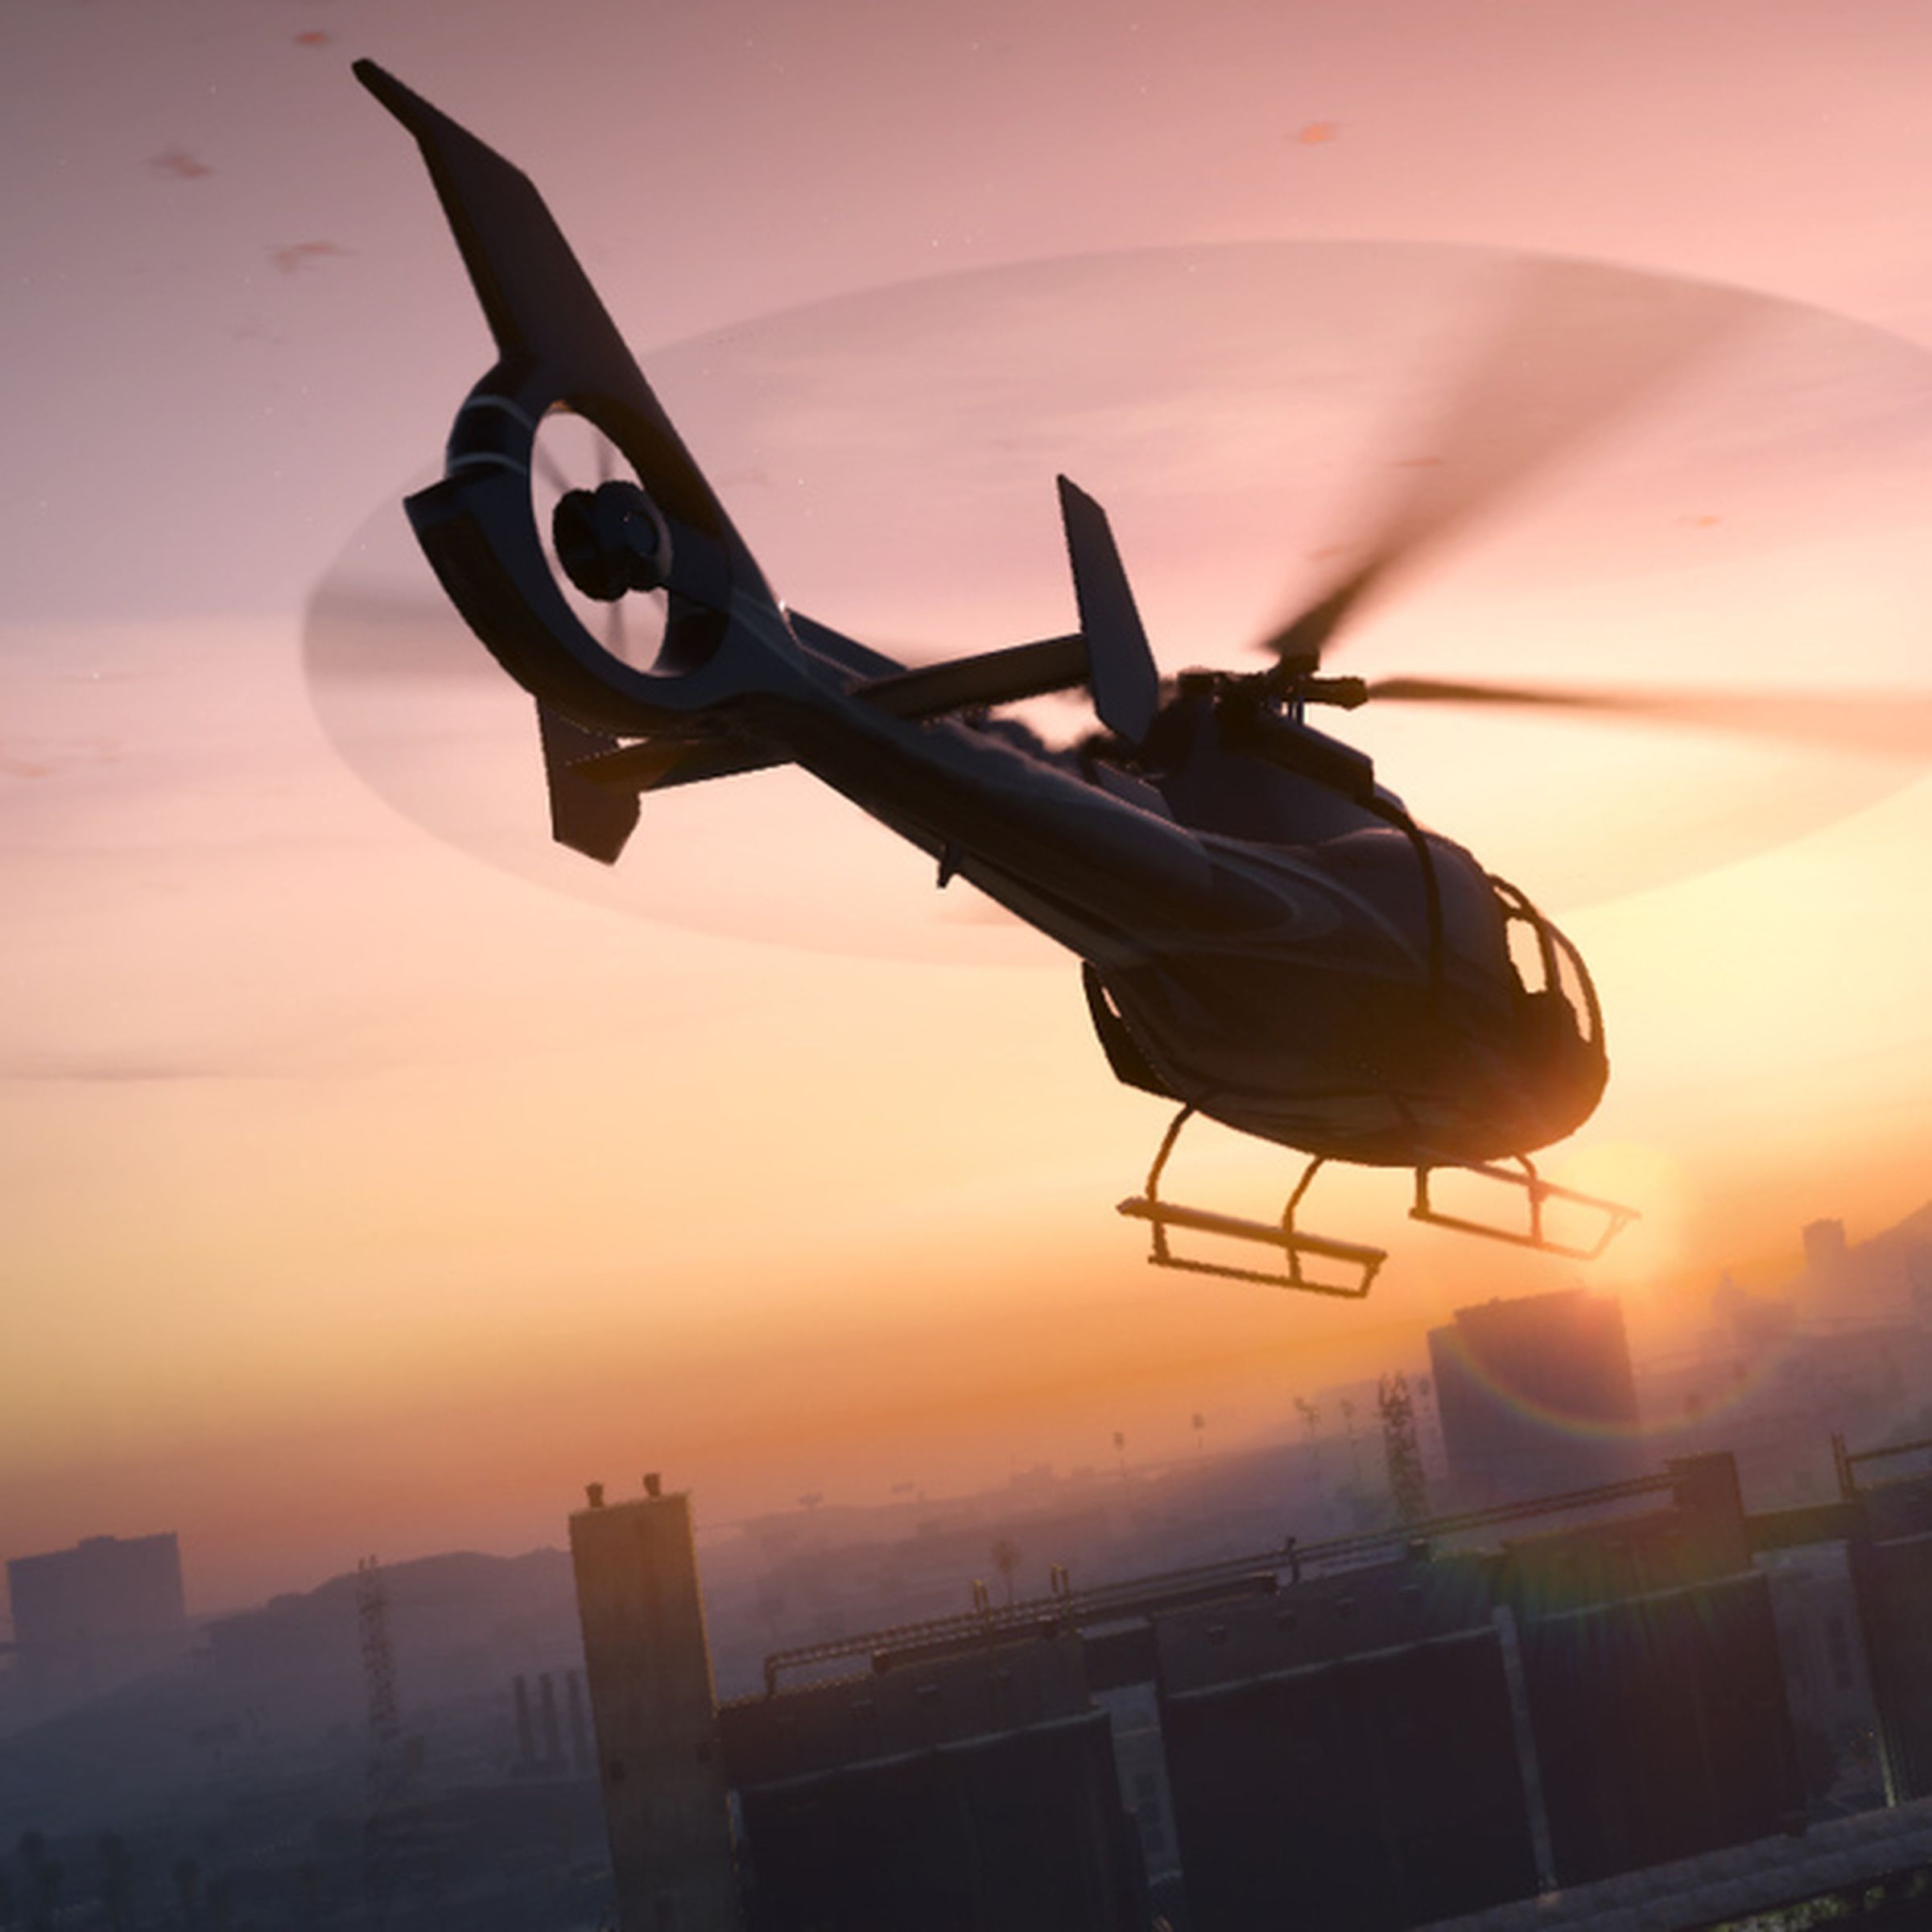 Keyart from Grand Theft Auto V featuring a helicopter flying over Los Santos at twilight